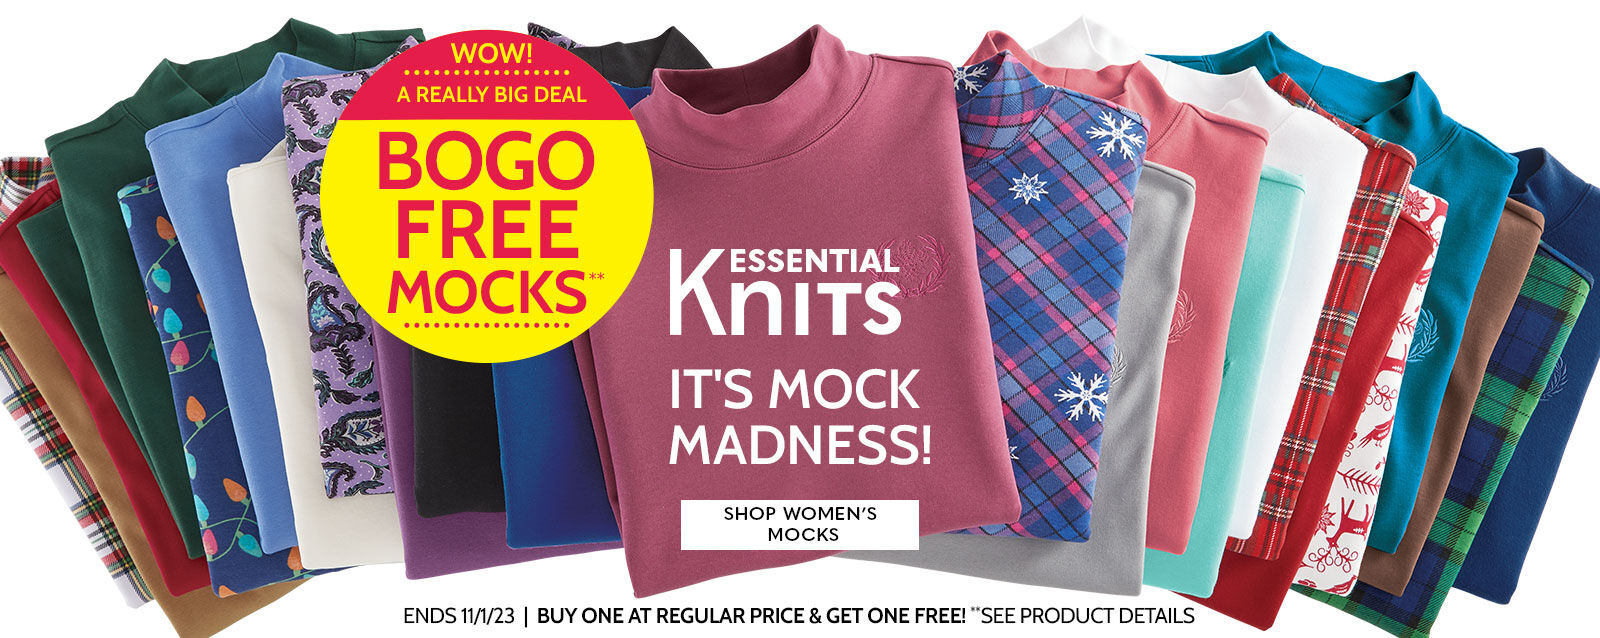 it's mock madness! wow! a really nig deal bogo free mocks shop women's mocks ends 11/1/23 | buy one at regular price & get one free**